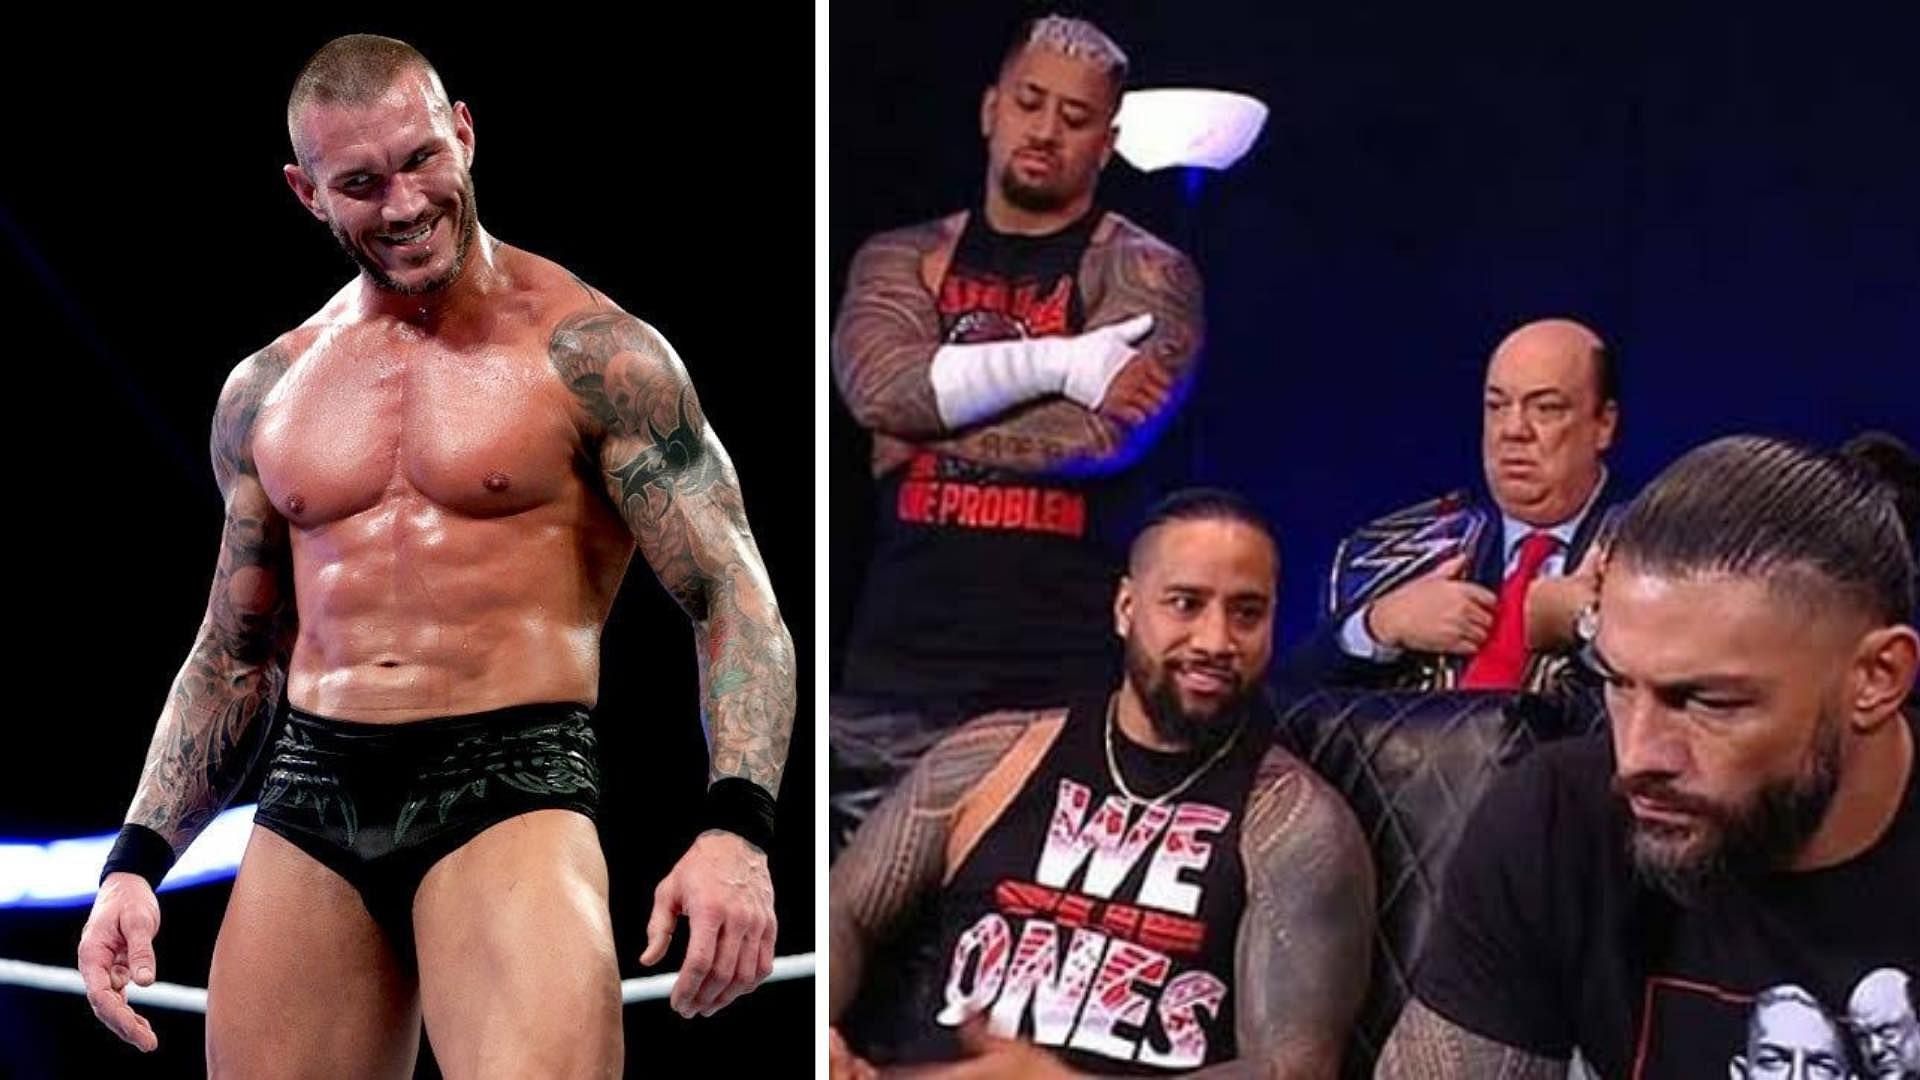 Randy Orton needs to exact revenge on The Bloodline for what they did to him.